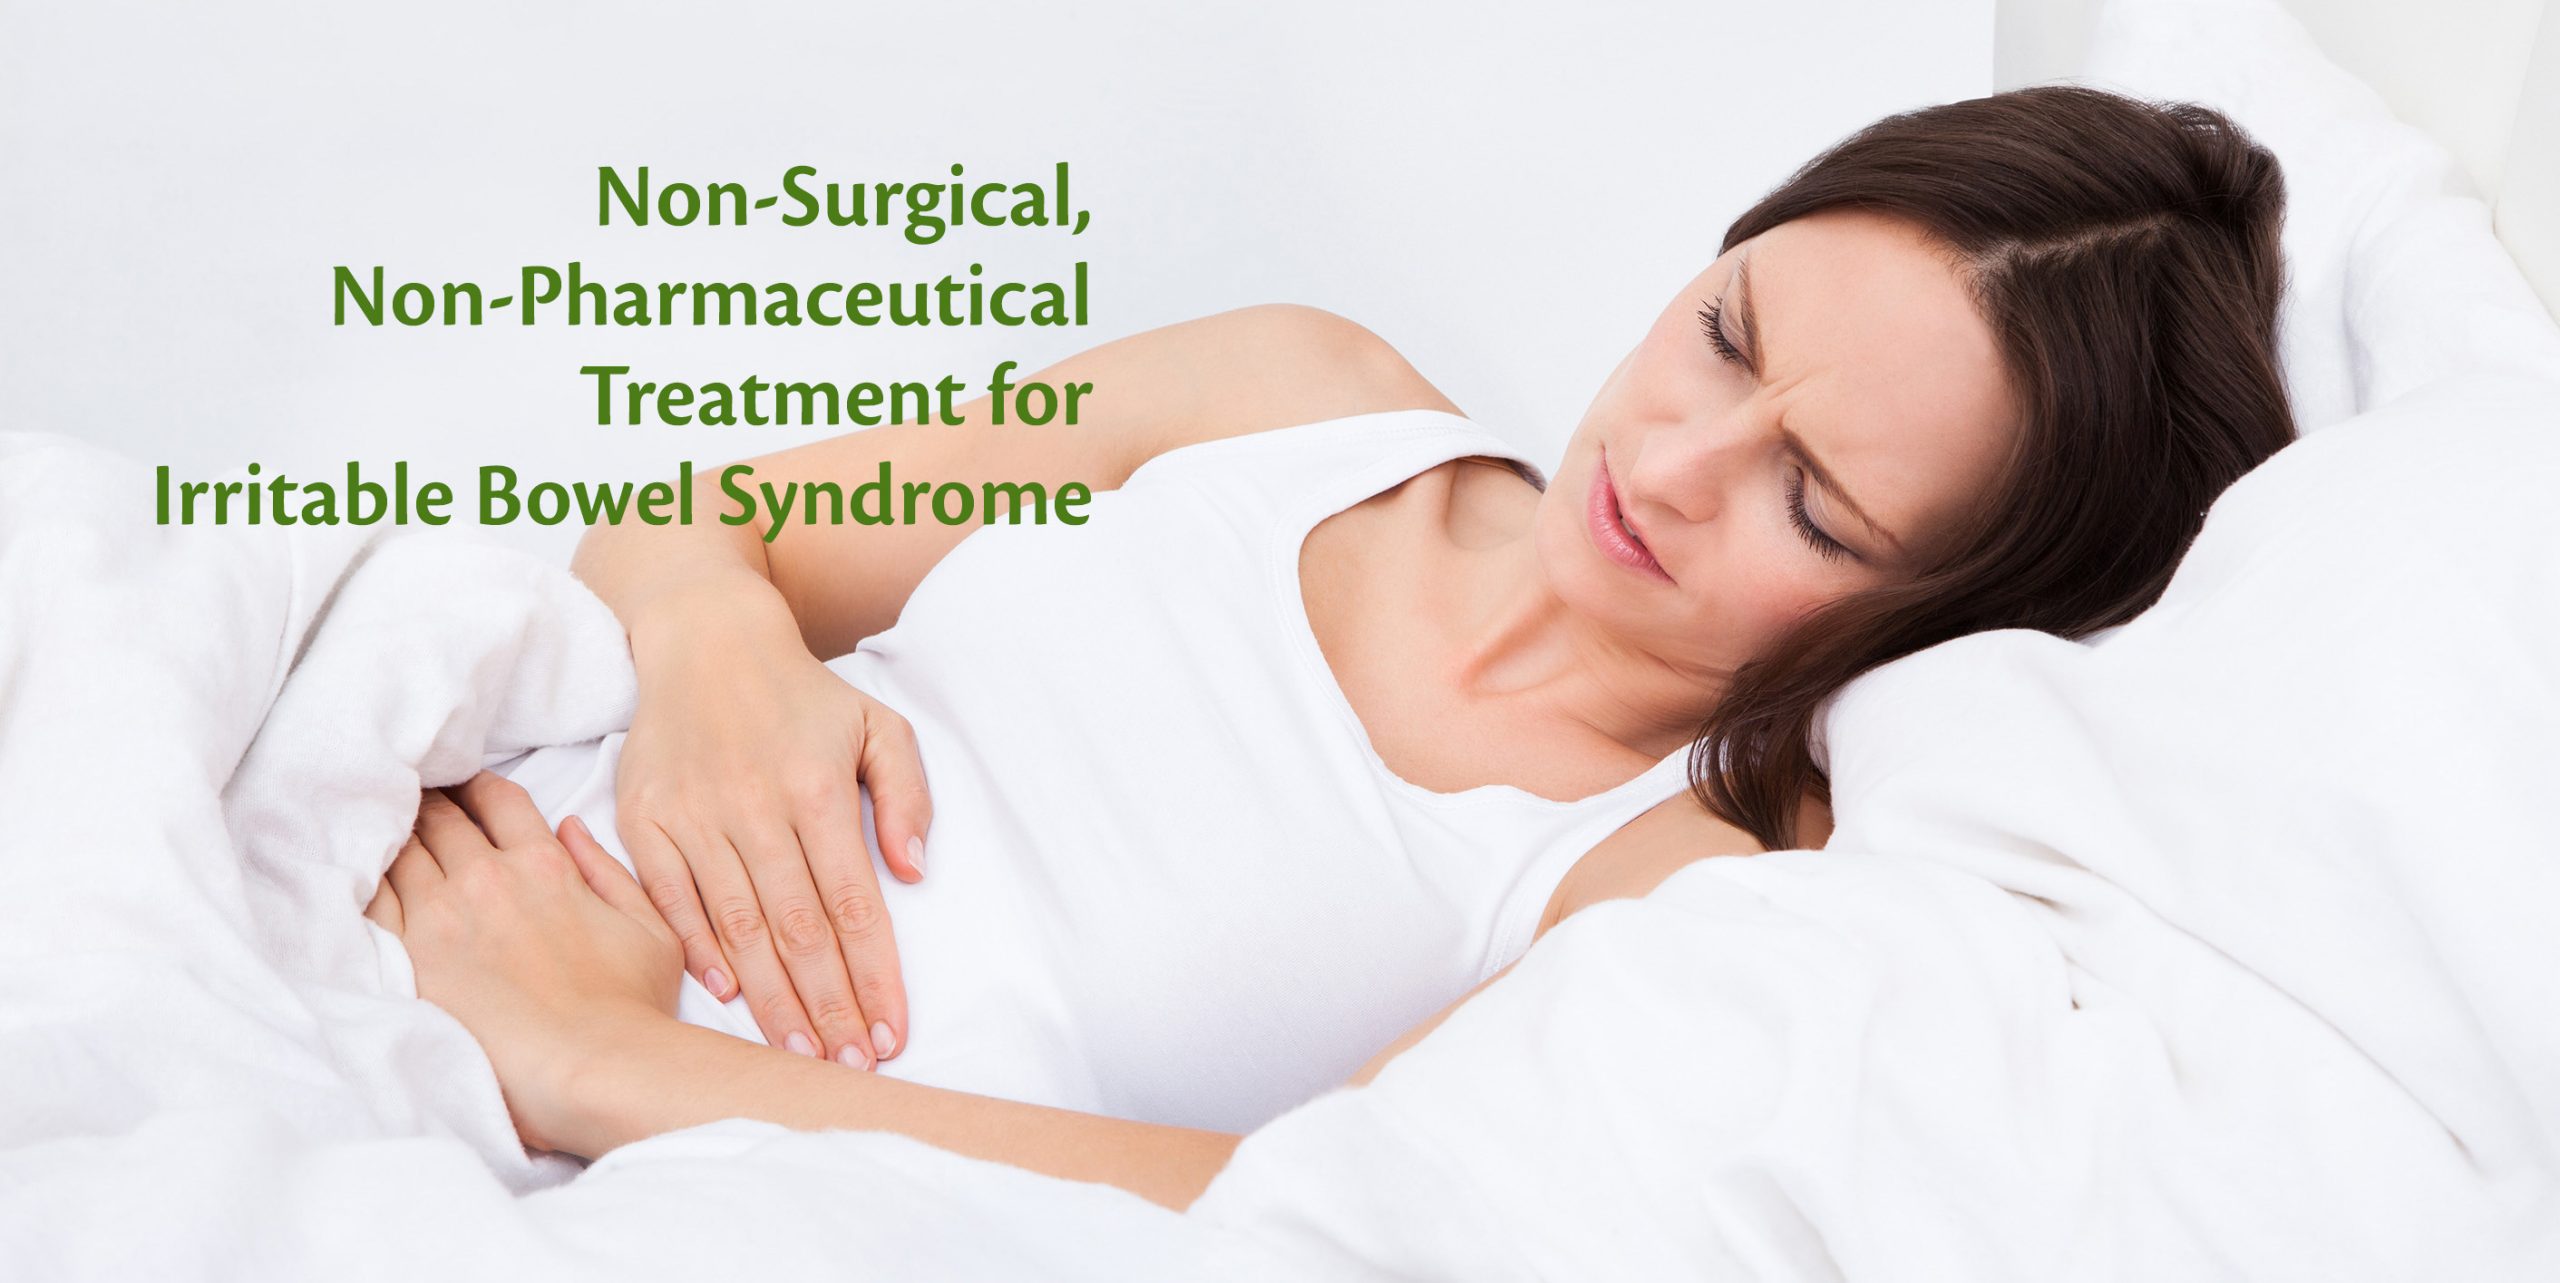 Non-surgical, noon-pharmaceutical treatment for Irritable Bowel Syndrome